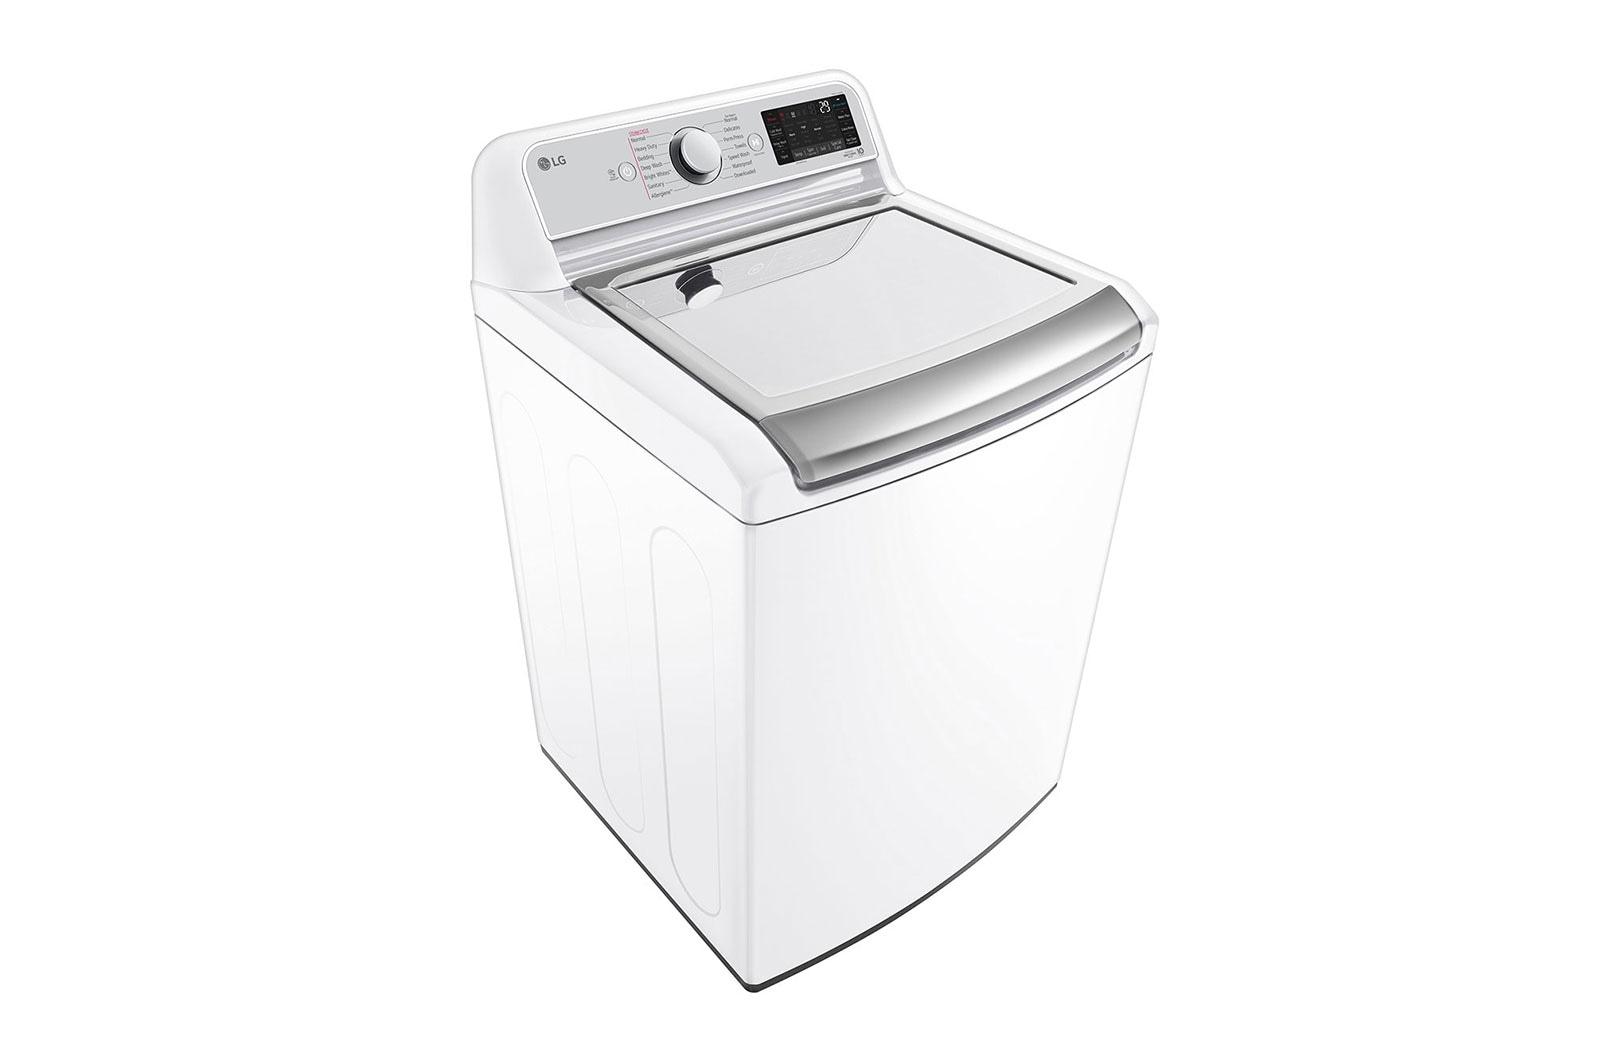 Lg 5.5 cu.ft. Mega Capacity Smart wi-fi Enabled Top Load Washer with TurboWash3D™ Technology and Allergiene™ Cycle